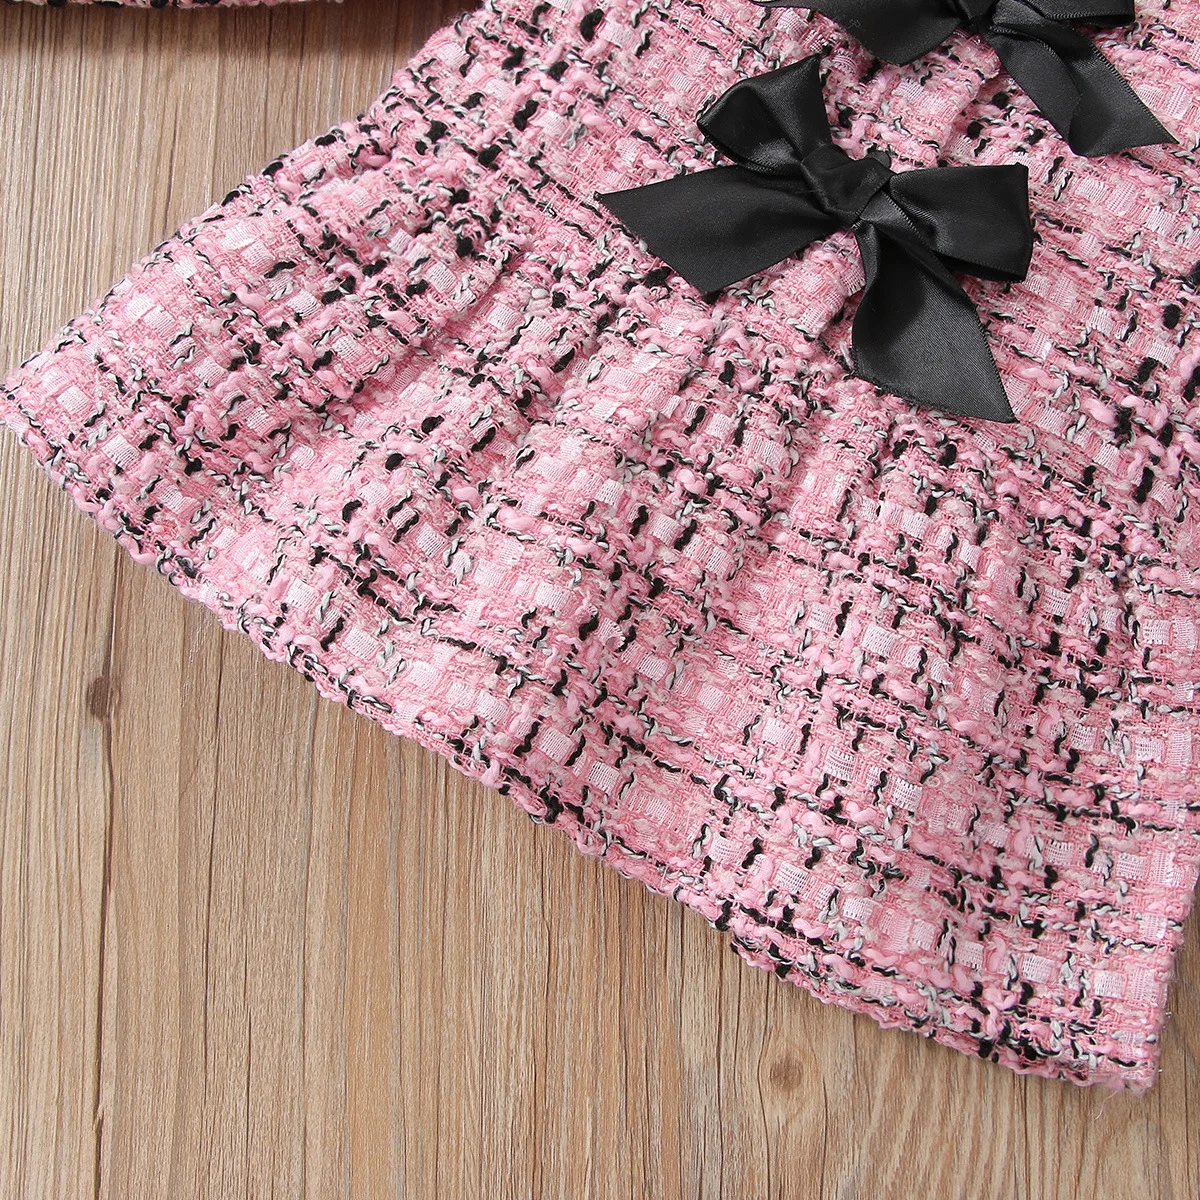 baby's complete set of clothing Fashion Girl Outfits Autumn Winter Pink Double Bow Skirt Top Trousers Baby Kids Formal Teenagers Plaid Children Clothes Set baby's complete set of clothing